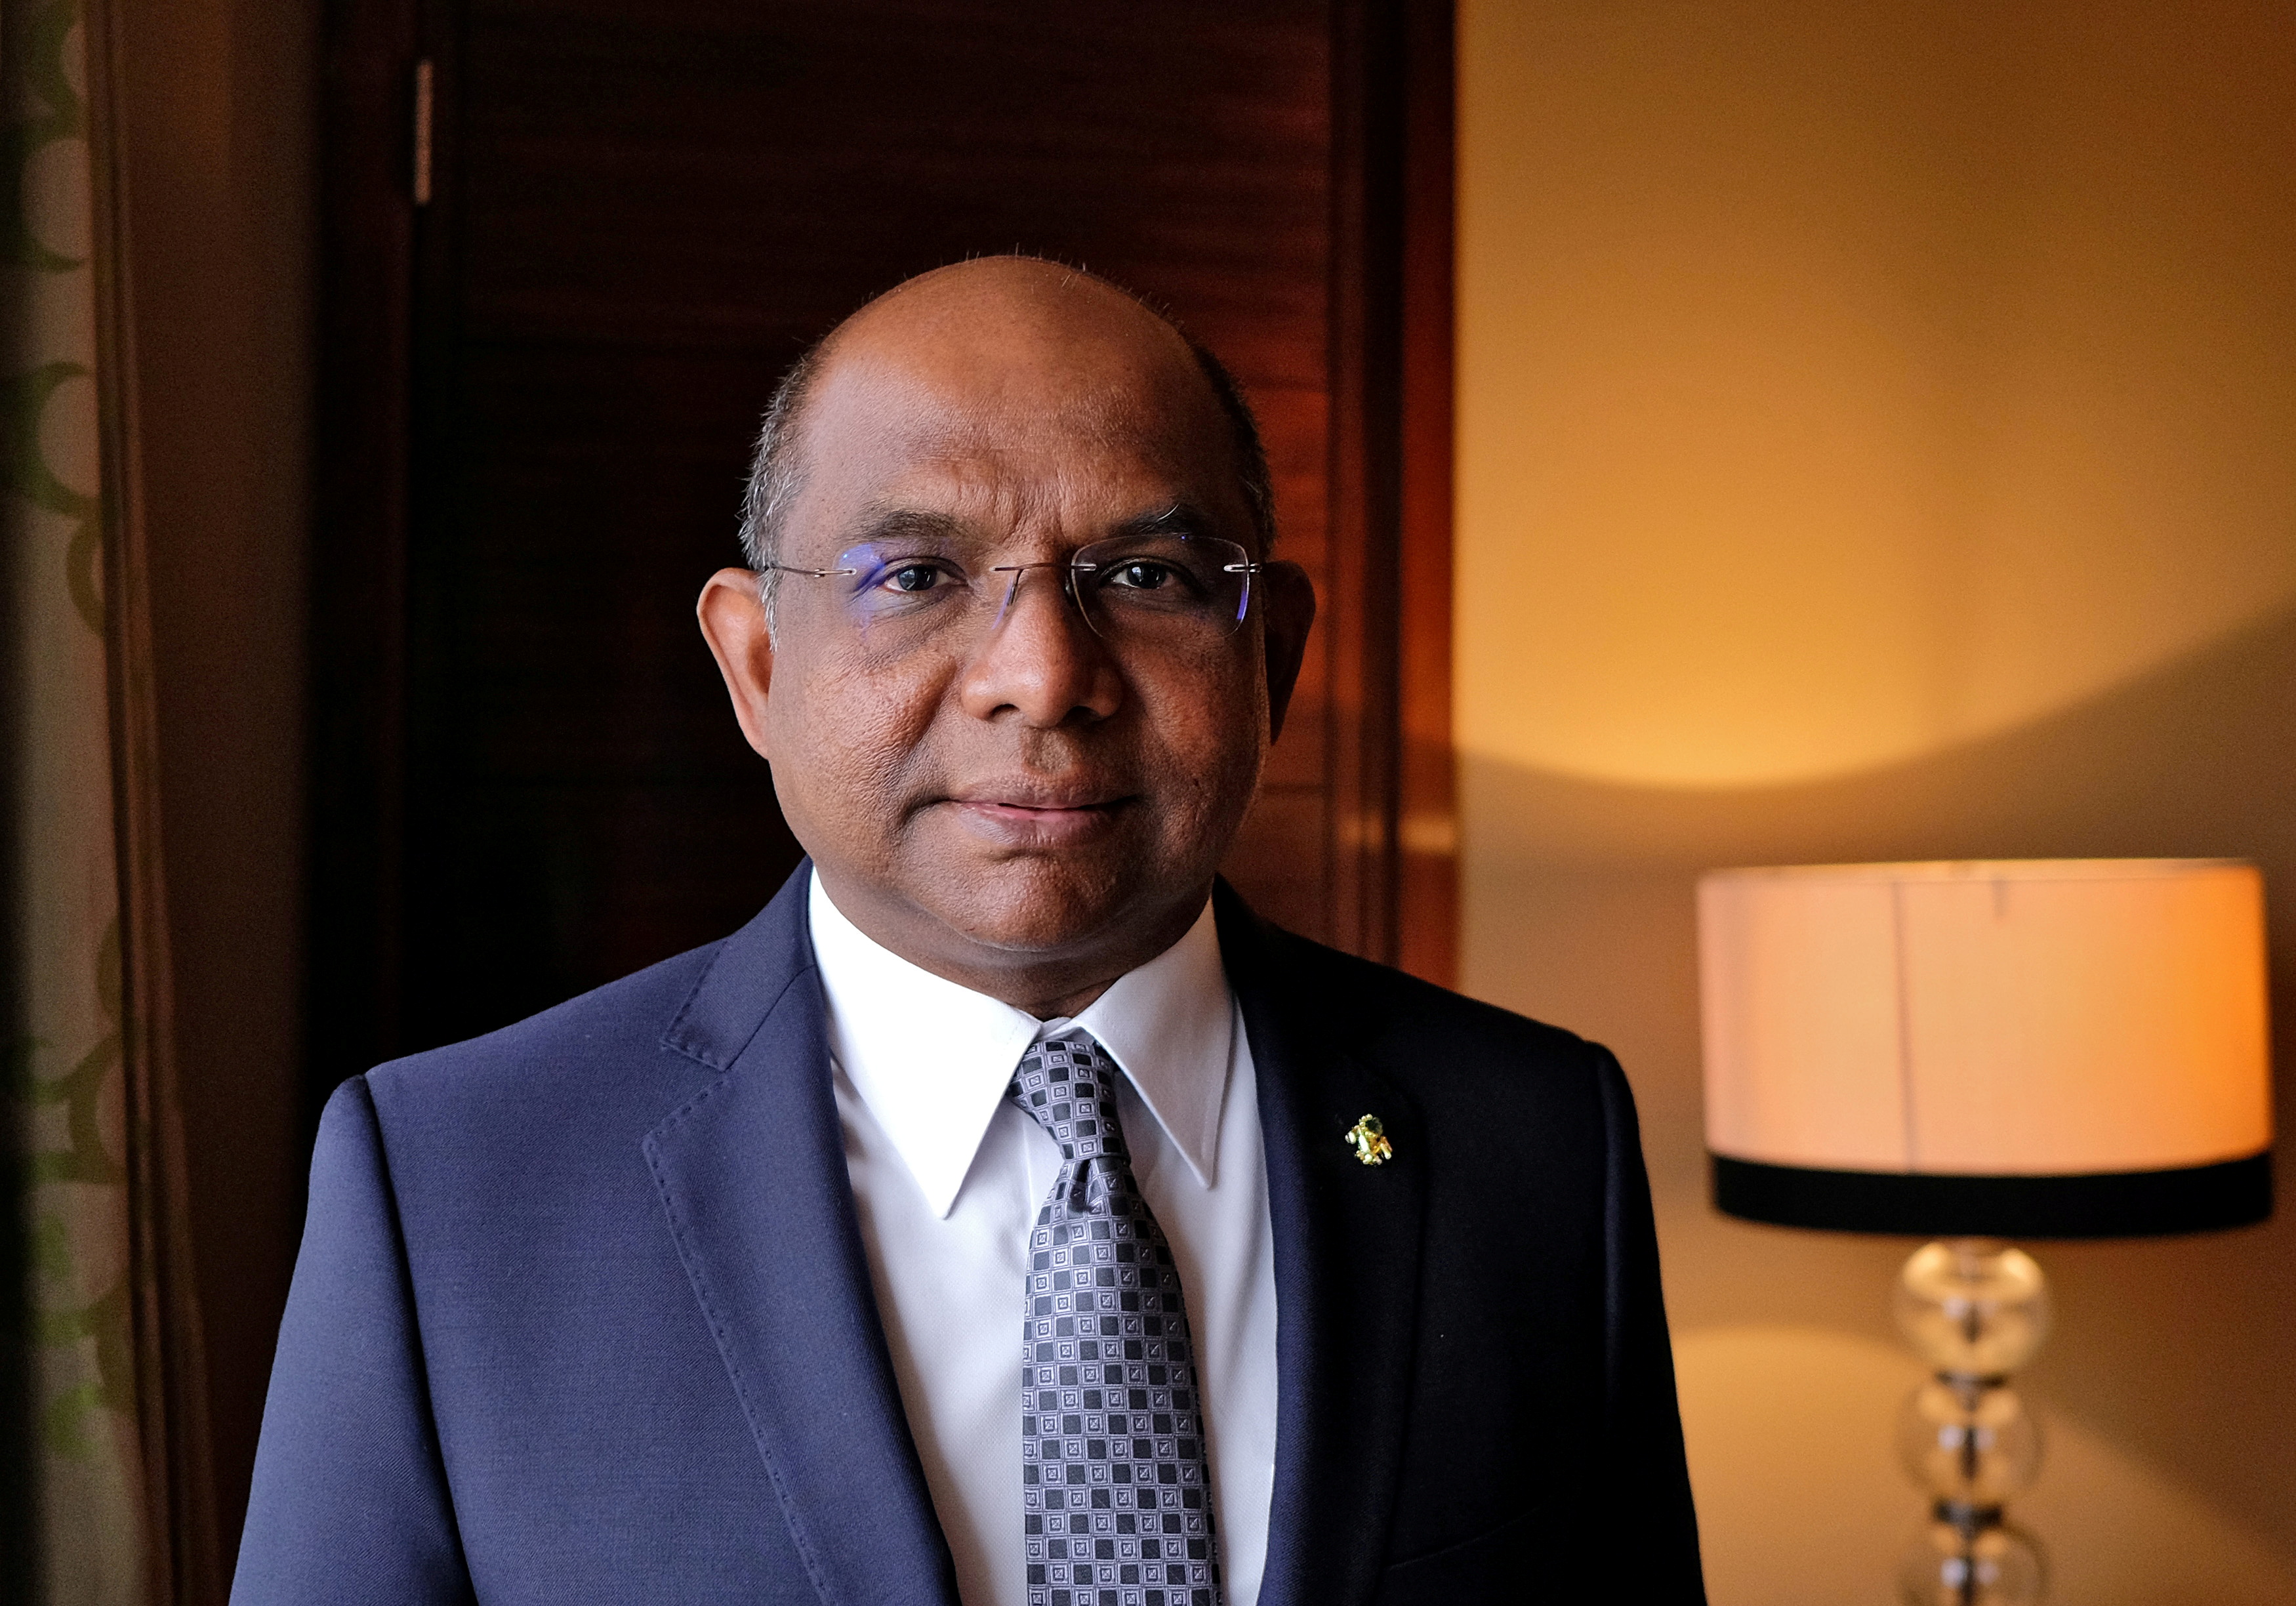 Maldives' Foreign Minister Abdulla Shahid poses after an interview with Reuters in New Delhi, India, January 16, 2020. REUTERS/Alasdair Pal